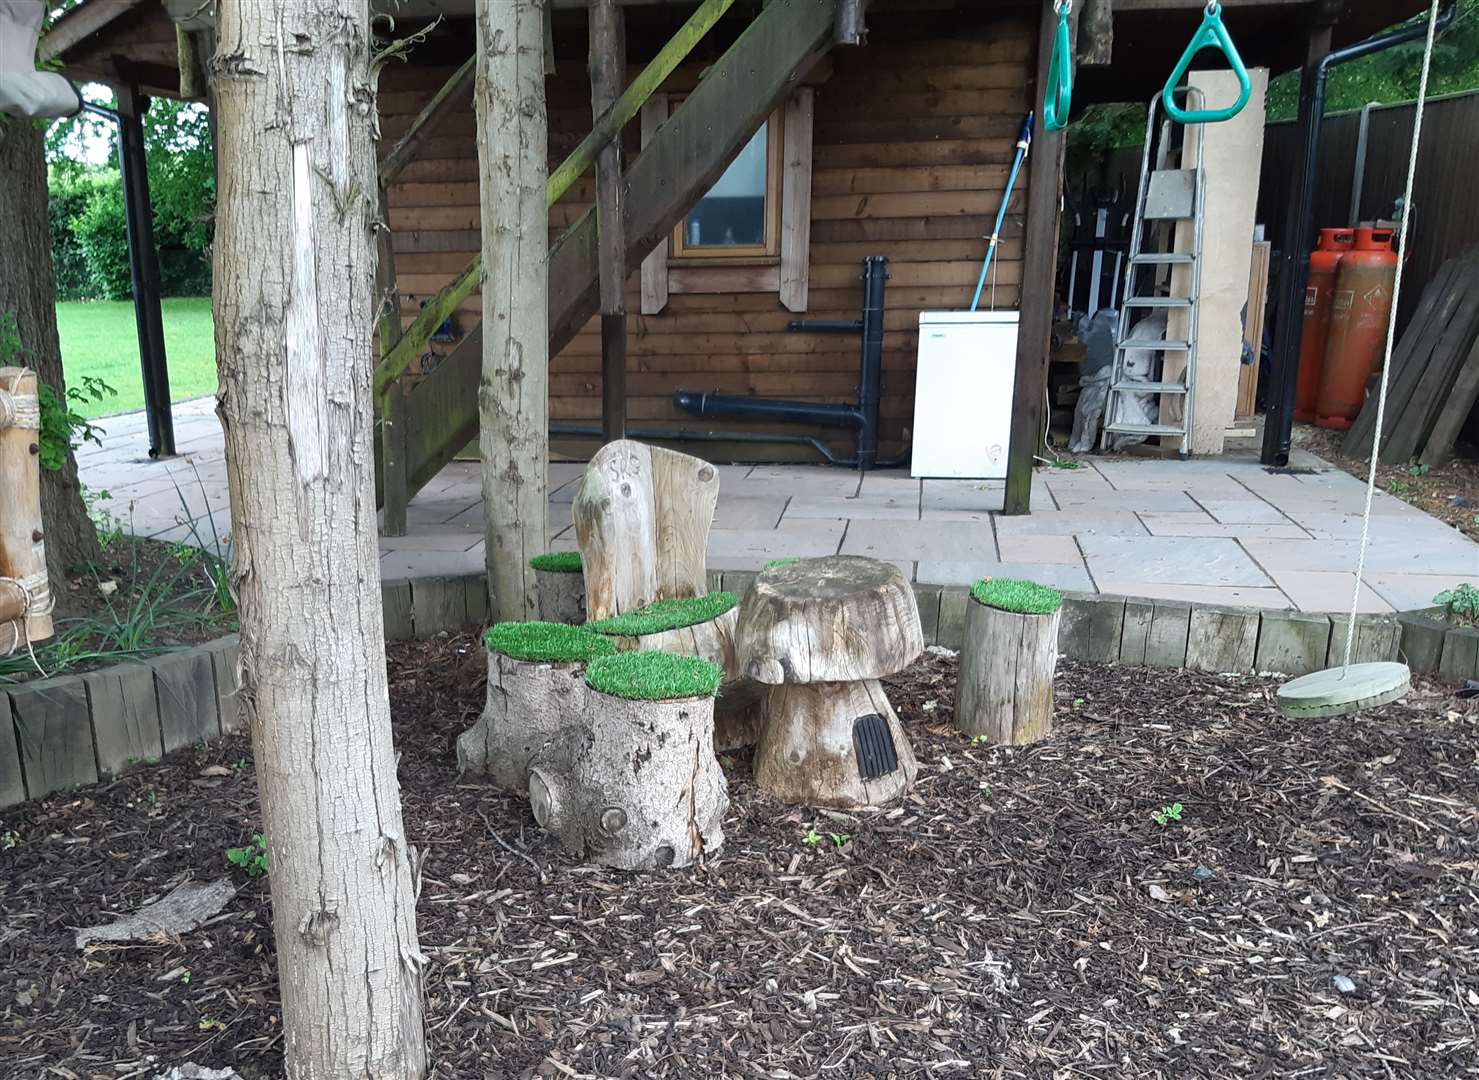 Dean Geering has also built a play area for his grandchildren under the treehouse. Picture: KMG